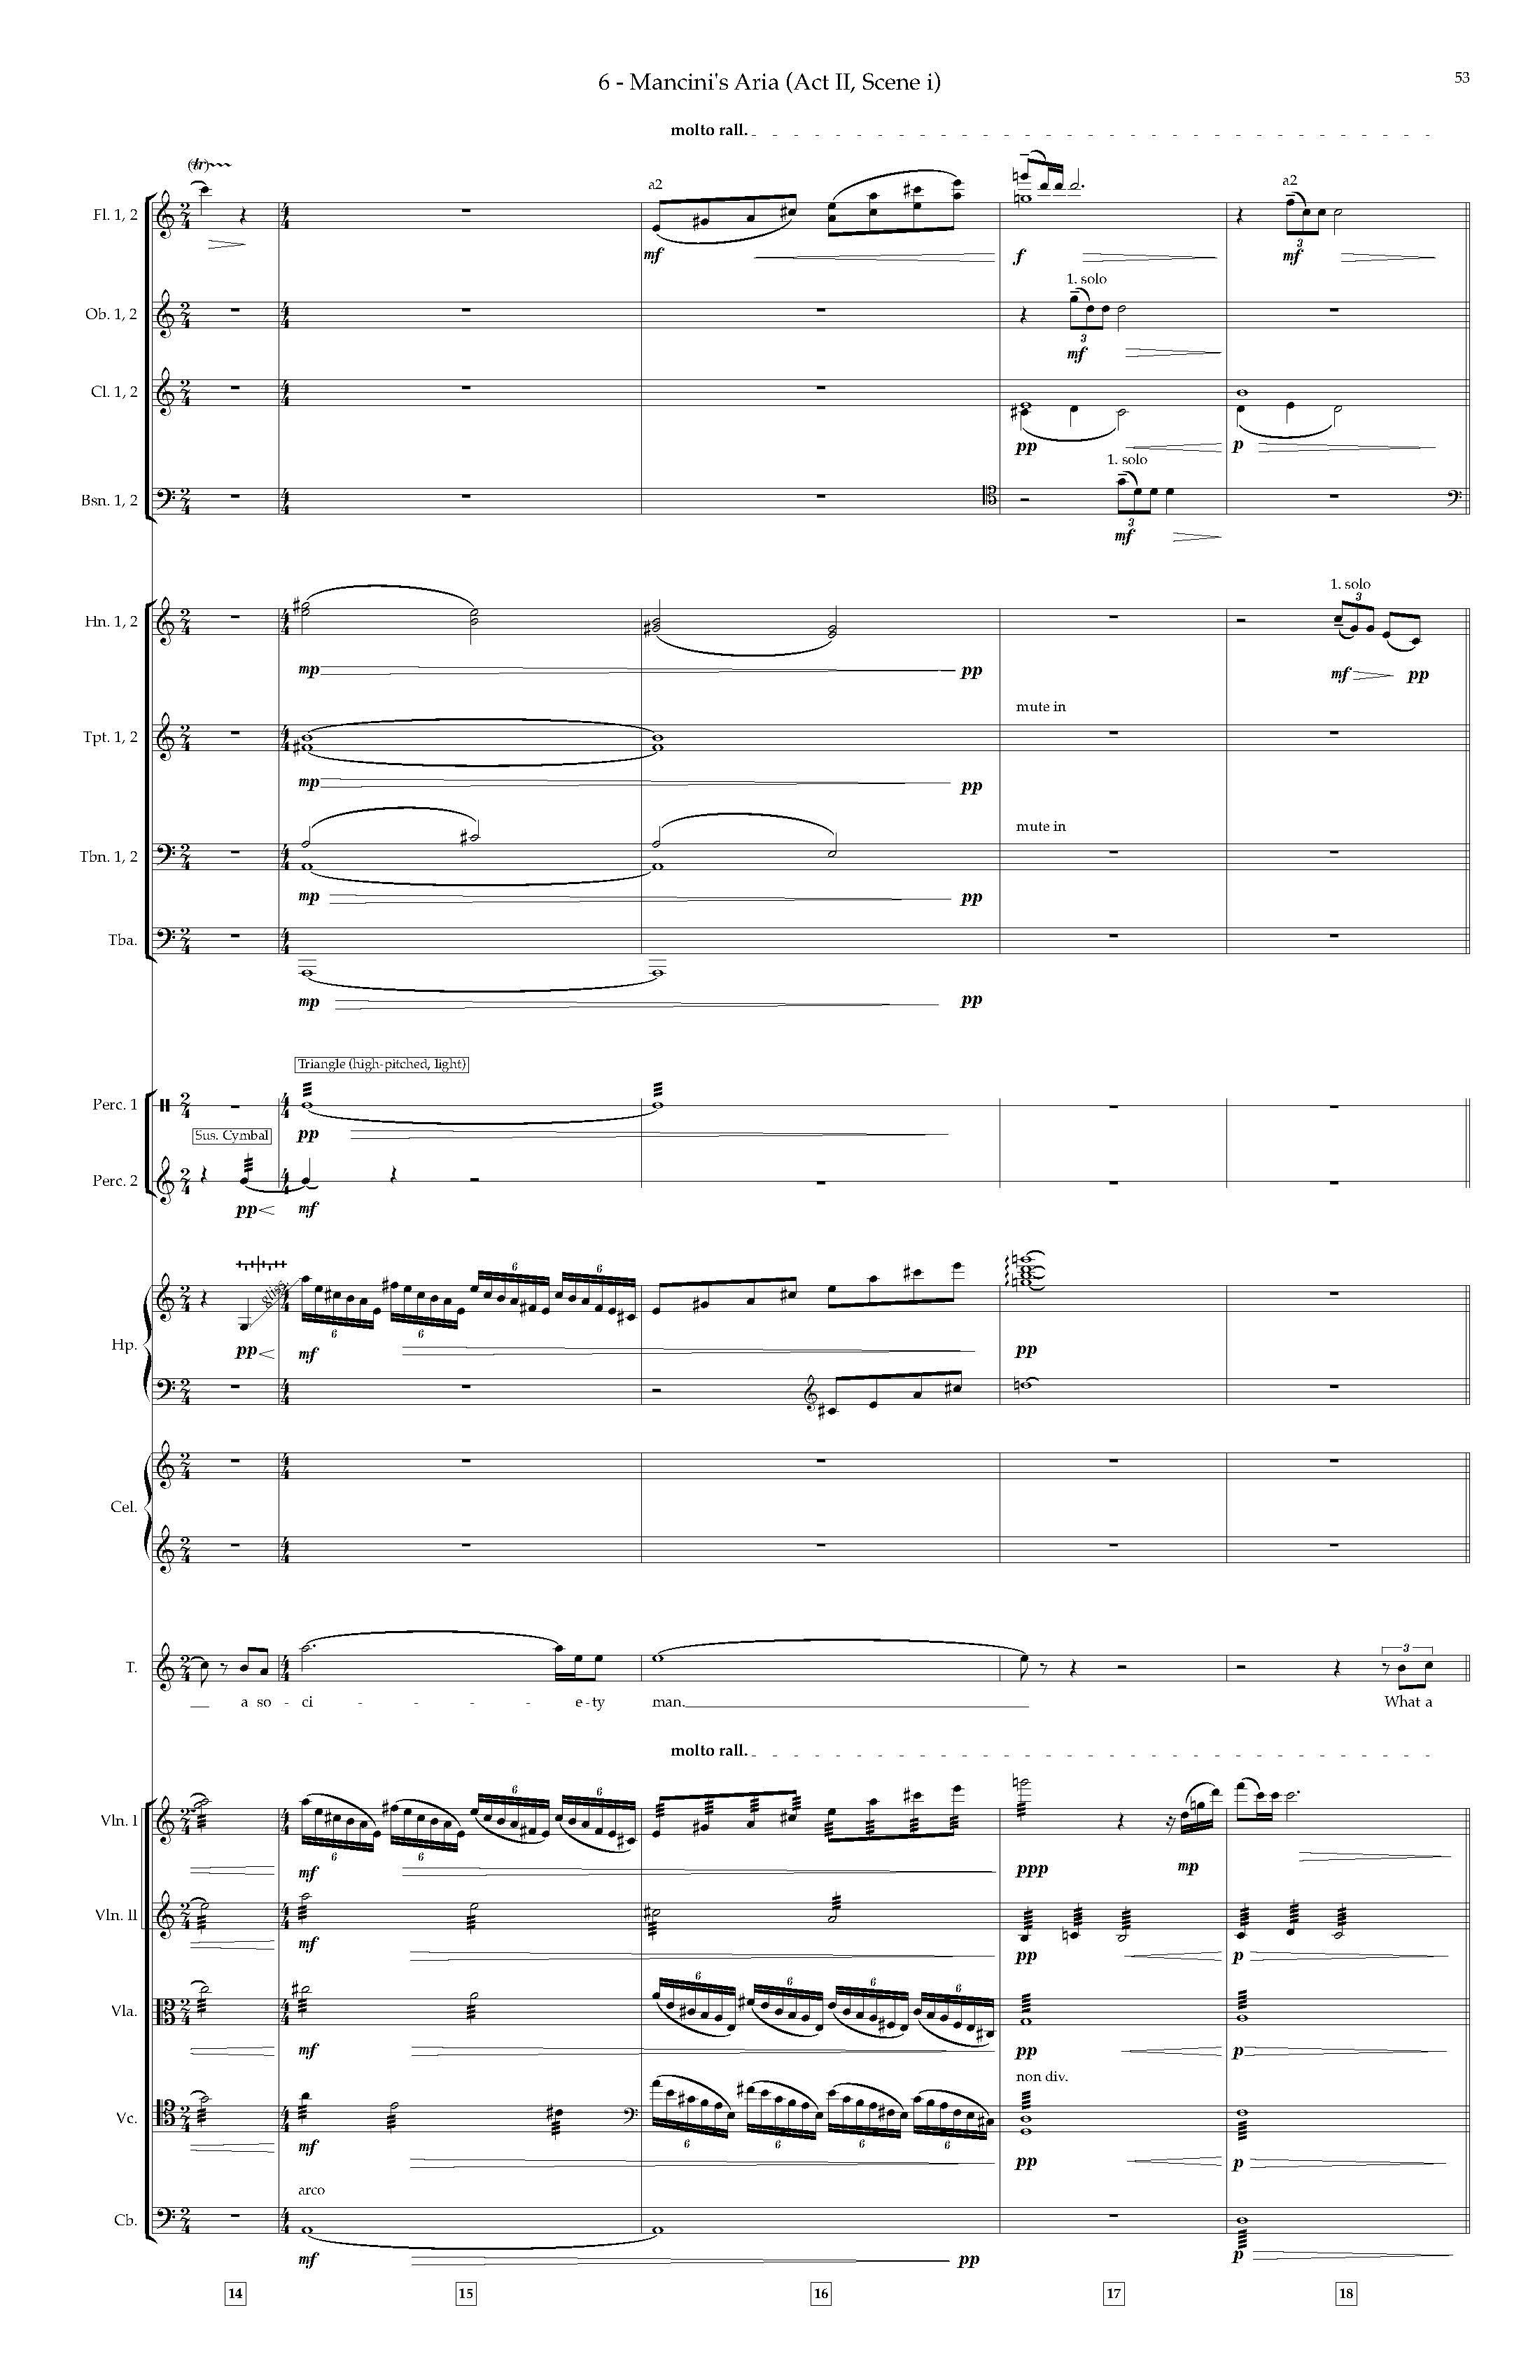 Arias and Interludes from HWGS - Complete Score_Page_59.jpg